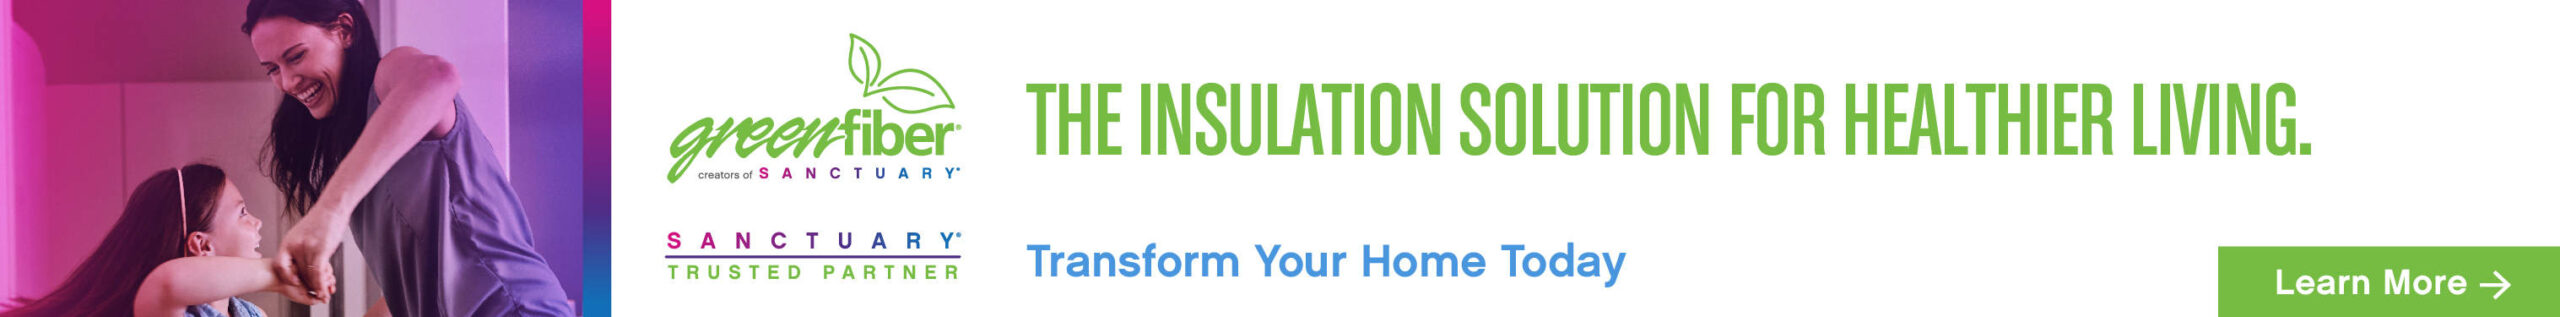 Banker Insulation is a Trusted Partner of Sanctuary by Greenfiber.